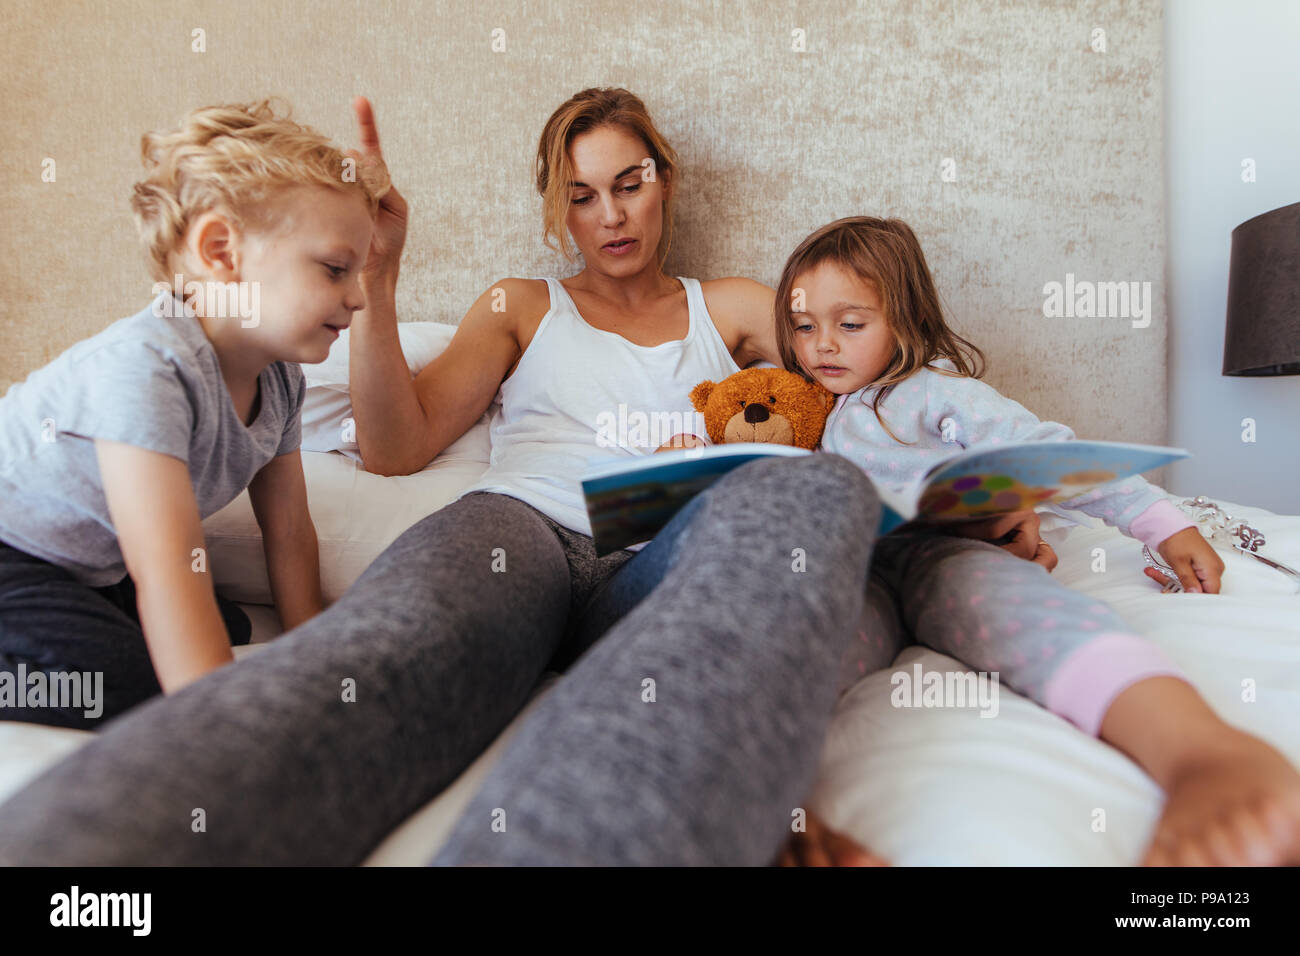 Mother reading bedtime story to children at home. Caring mother reading book for adorable little kids on bed. Stock Photo